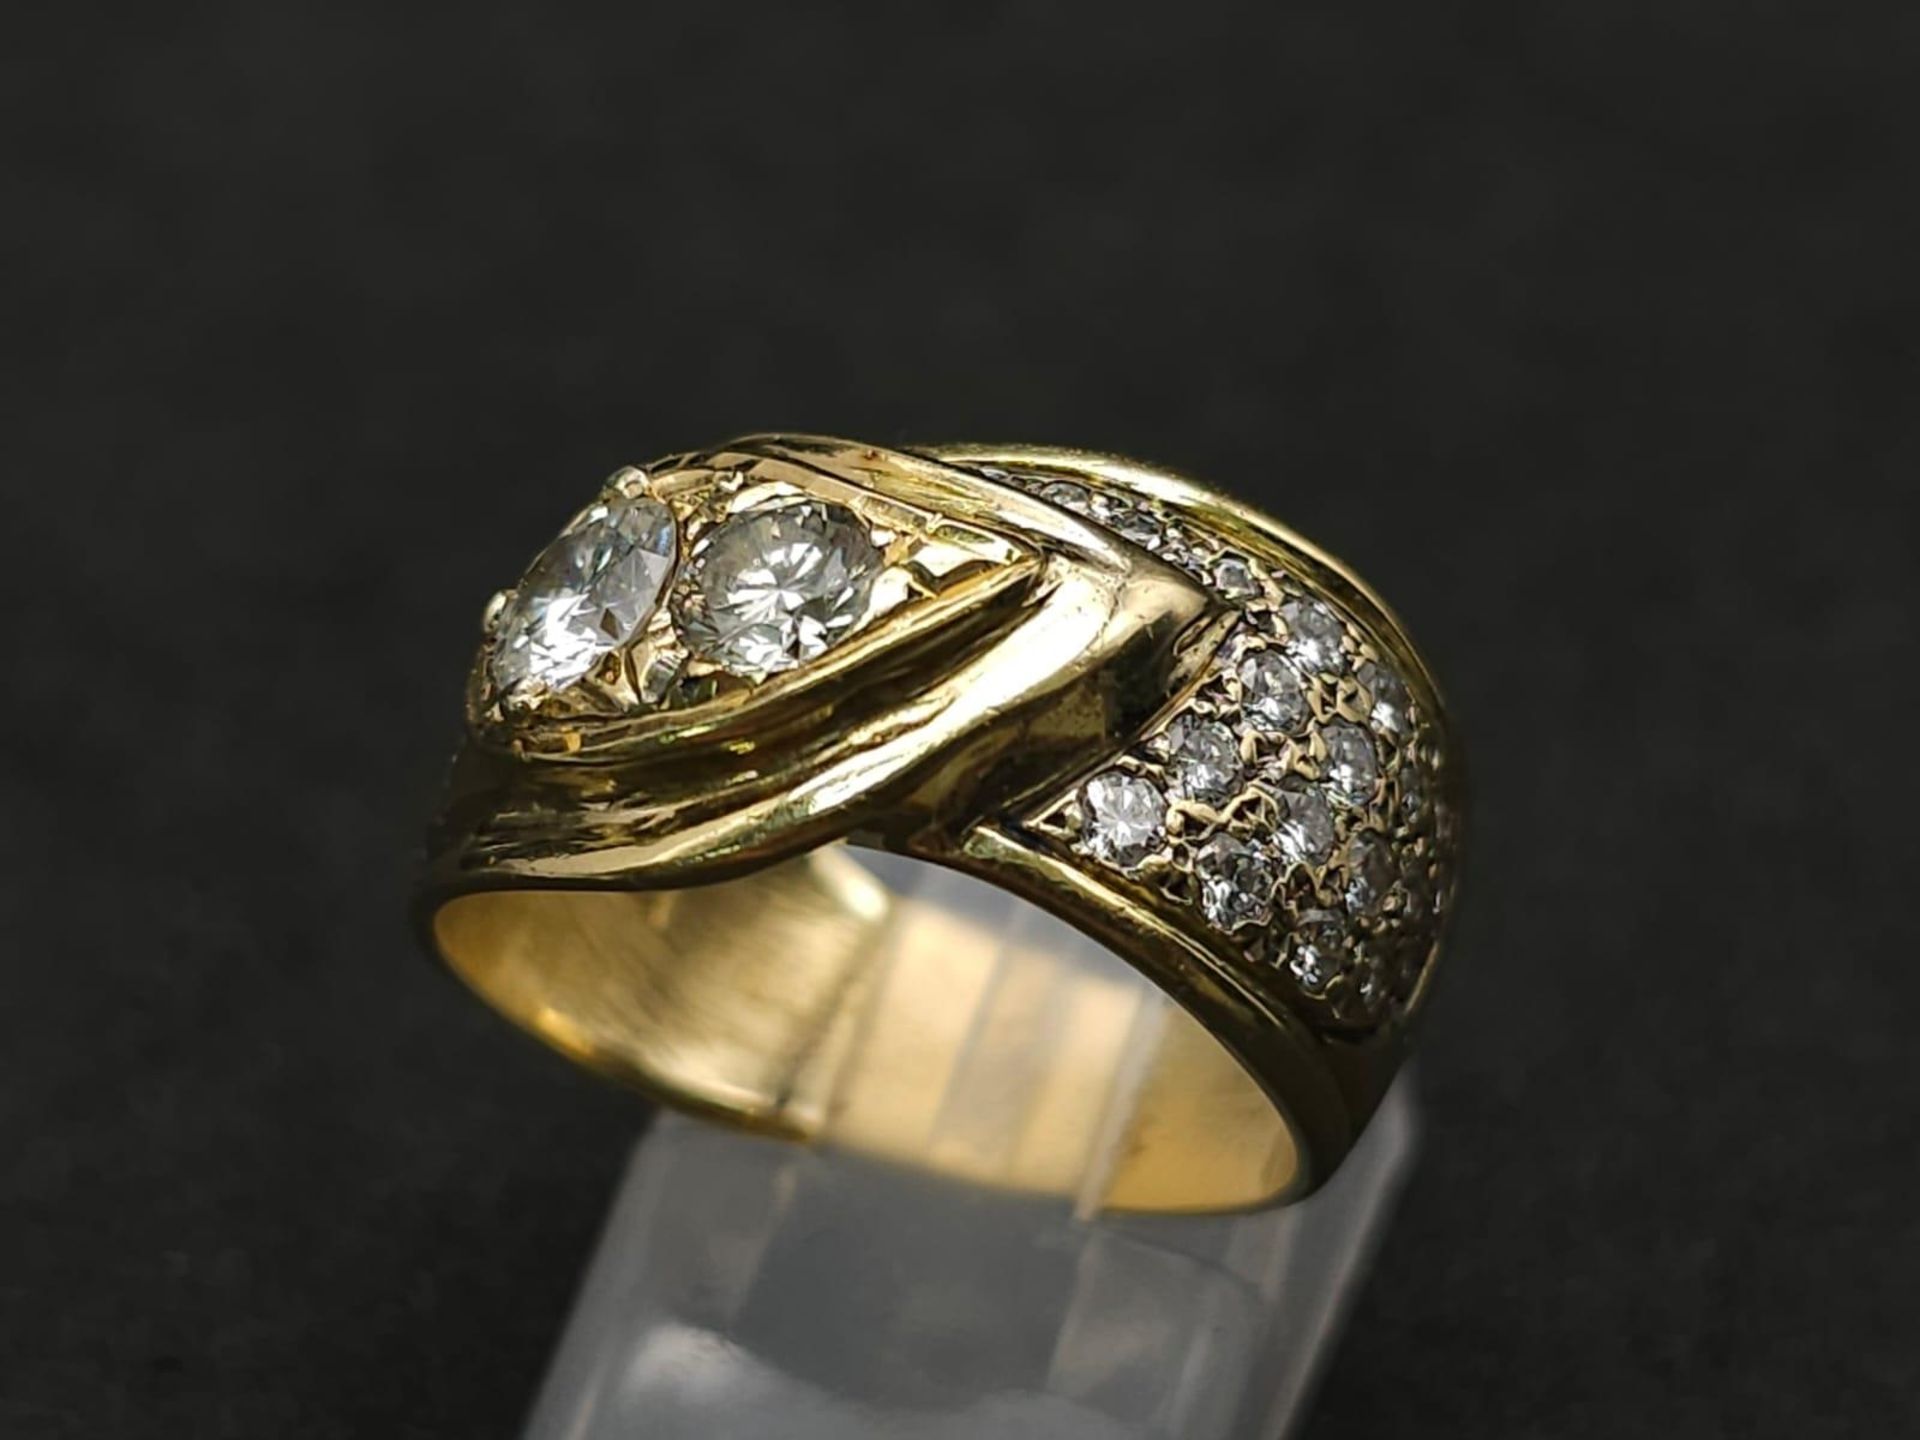 An 18kt Yellow Gold Ring with a duo of Round Cut Diamonds on one side, offset by a pavement of - Image 2 of 8